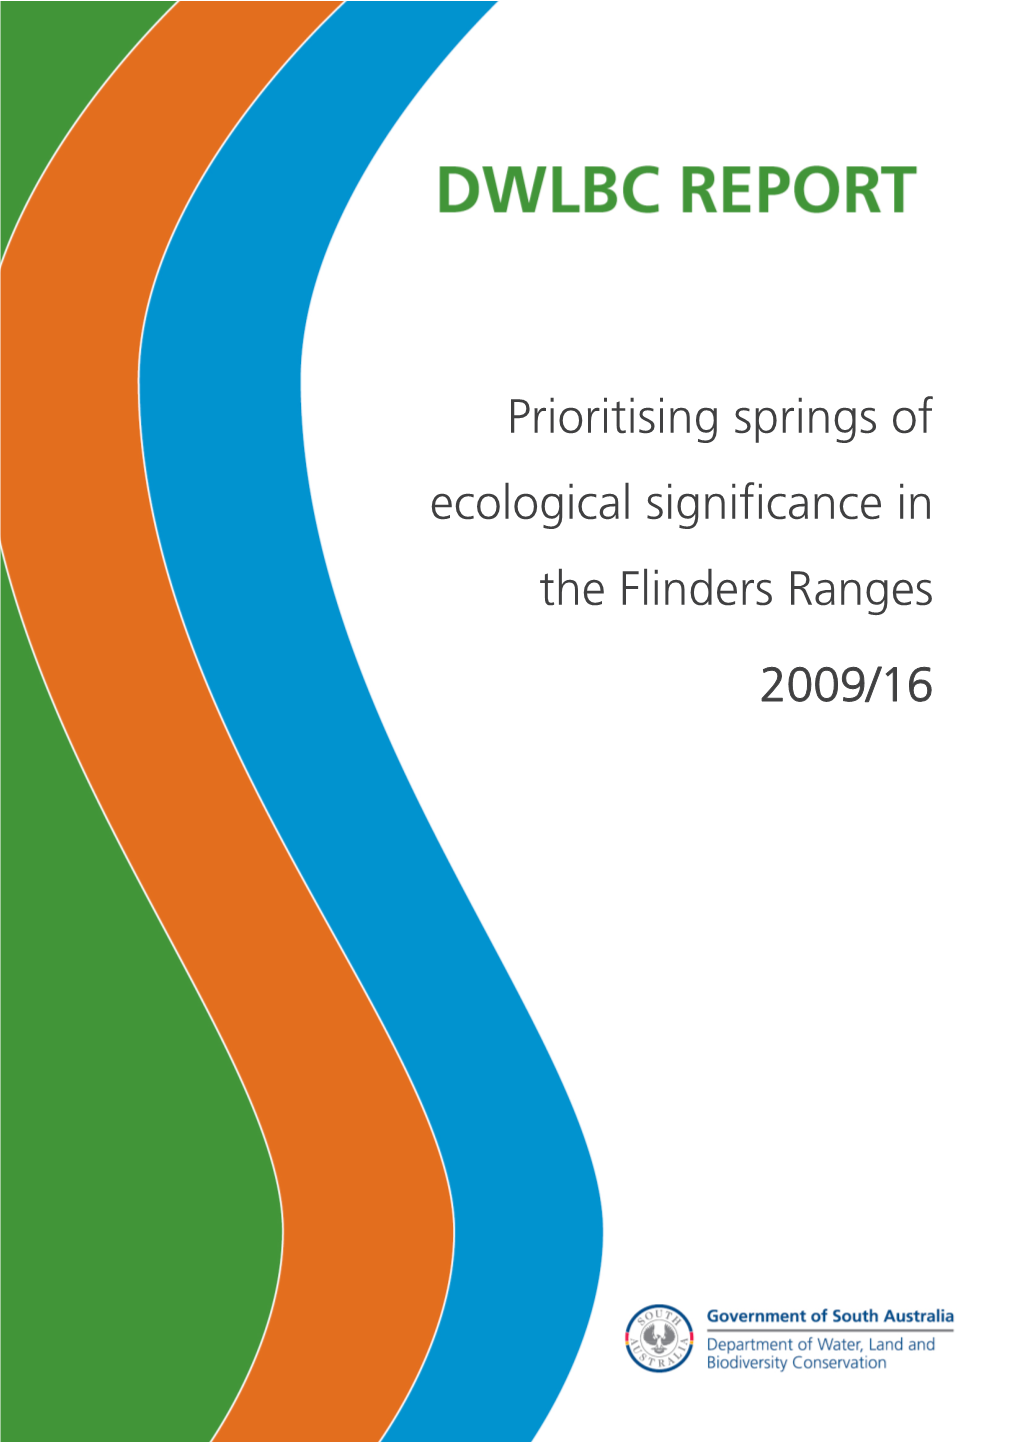 Prioritising Springs of Ecological Significance in the Flinders Ranges